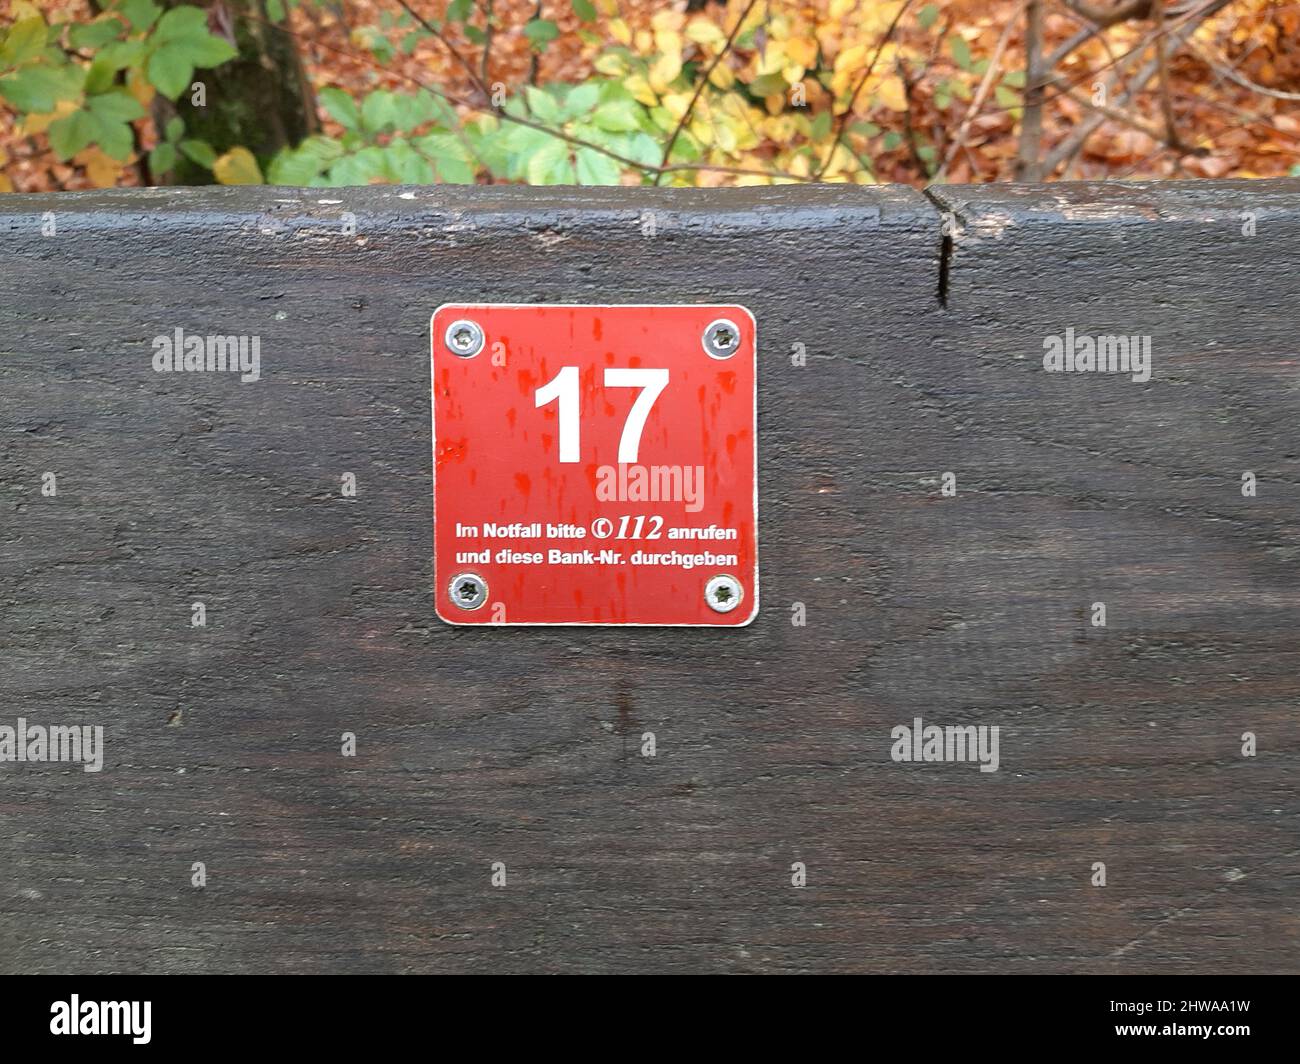 Emergency call sign on a bench in forest, Germany Stock Photo